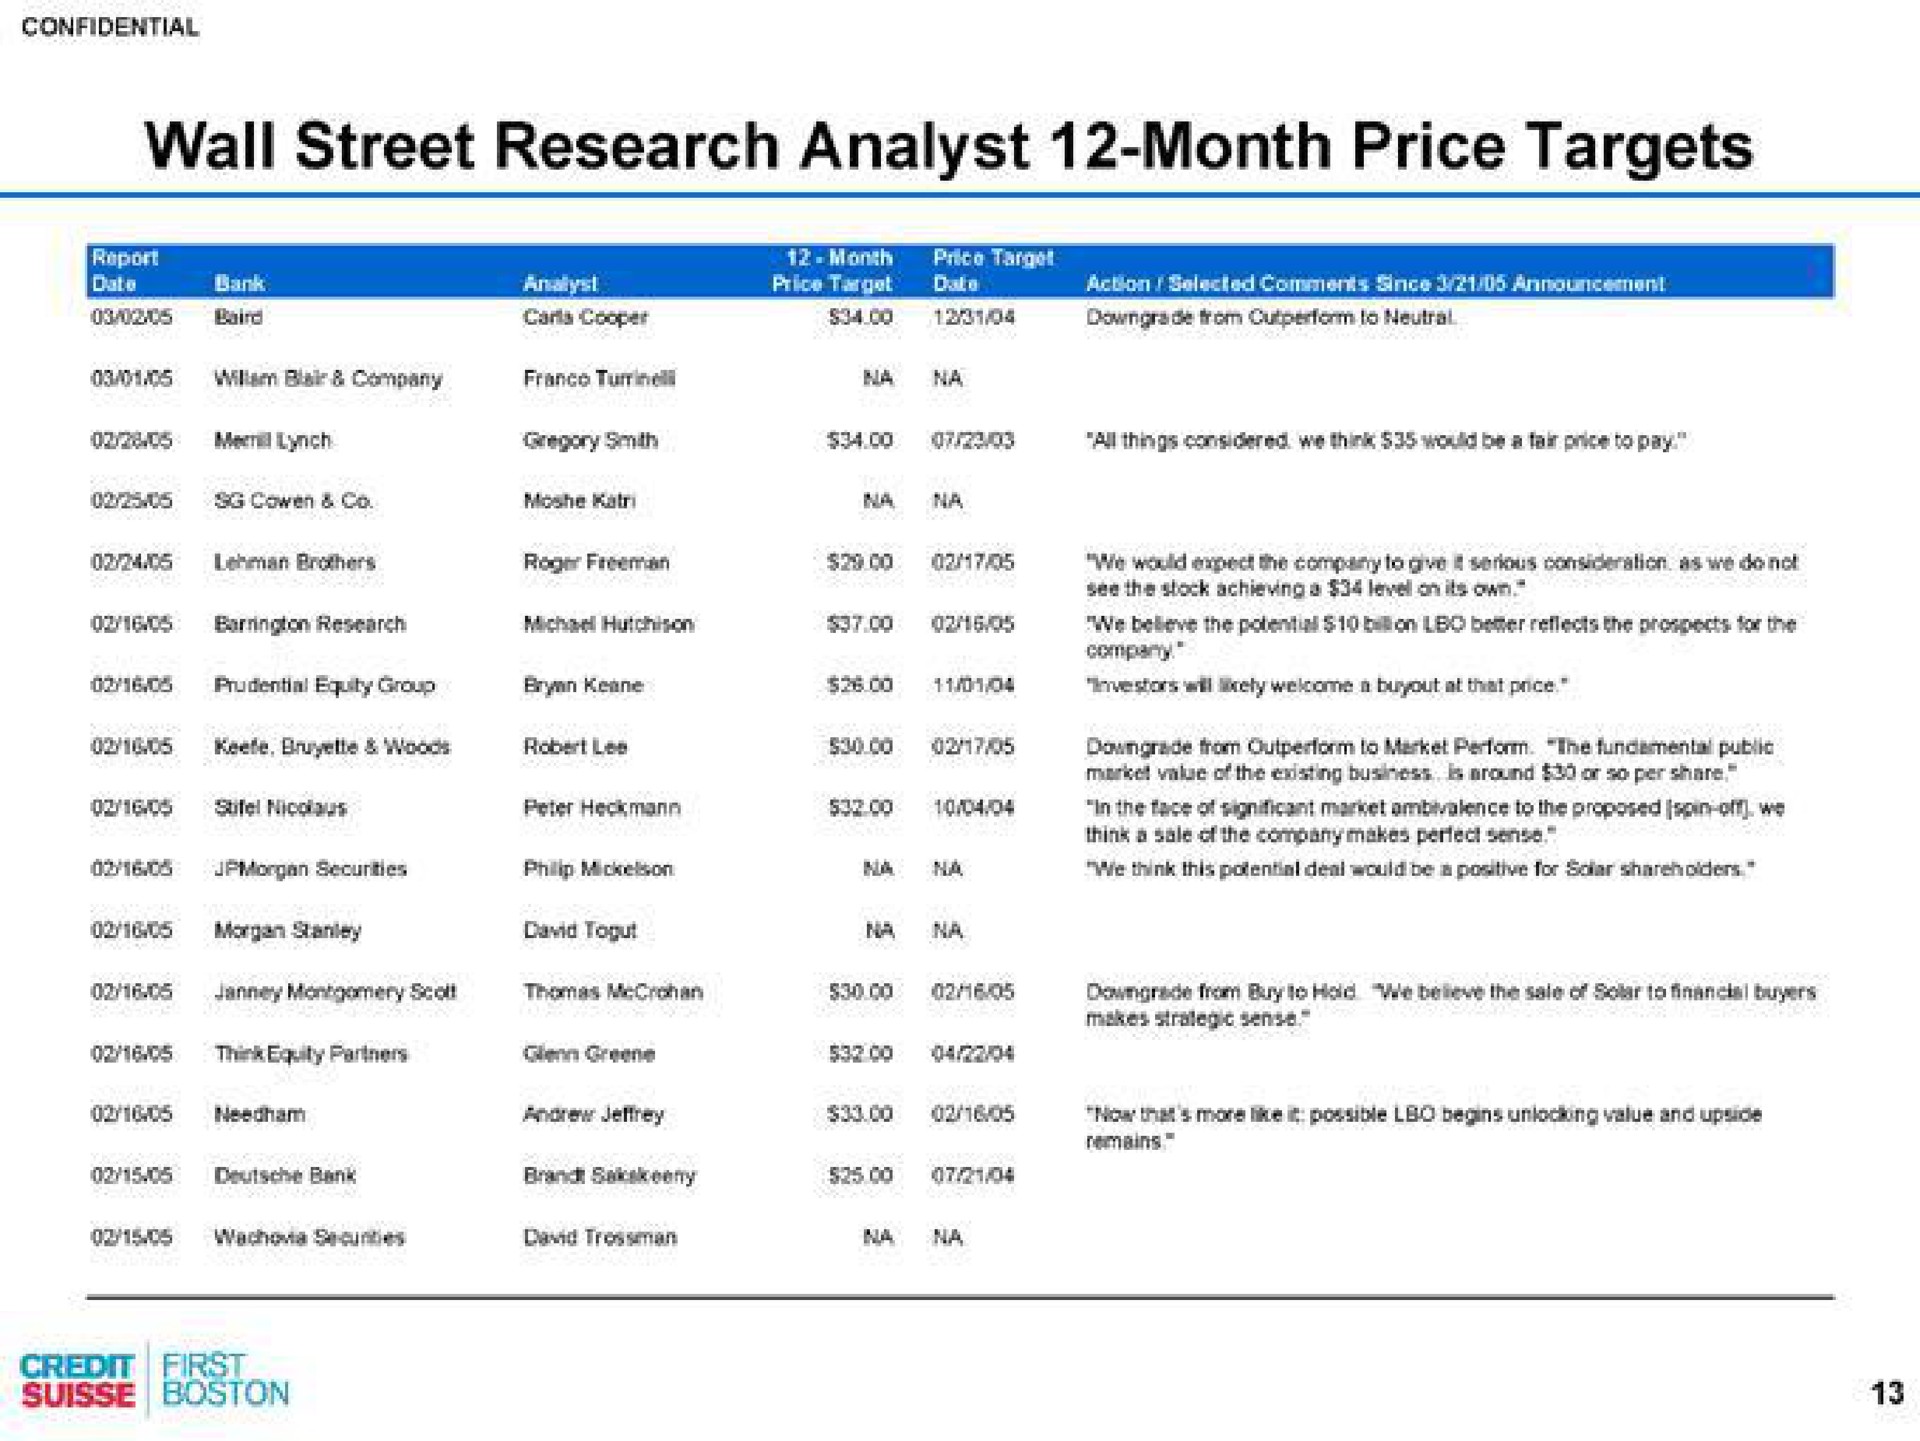 wall street research analyst month price targets | Credit Suisse